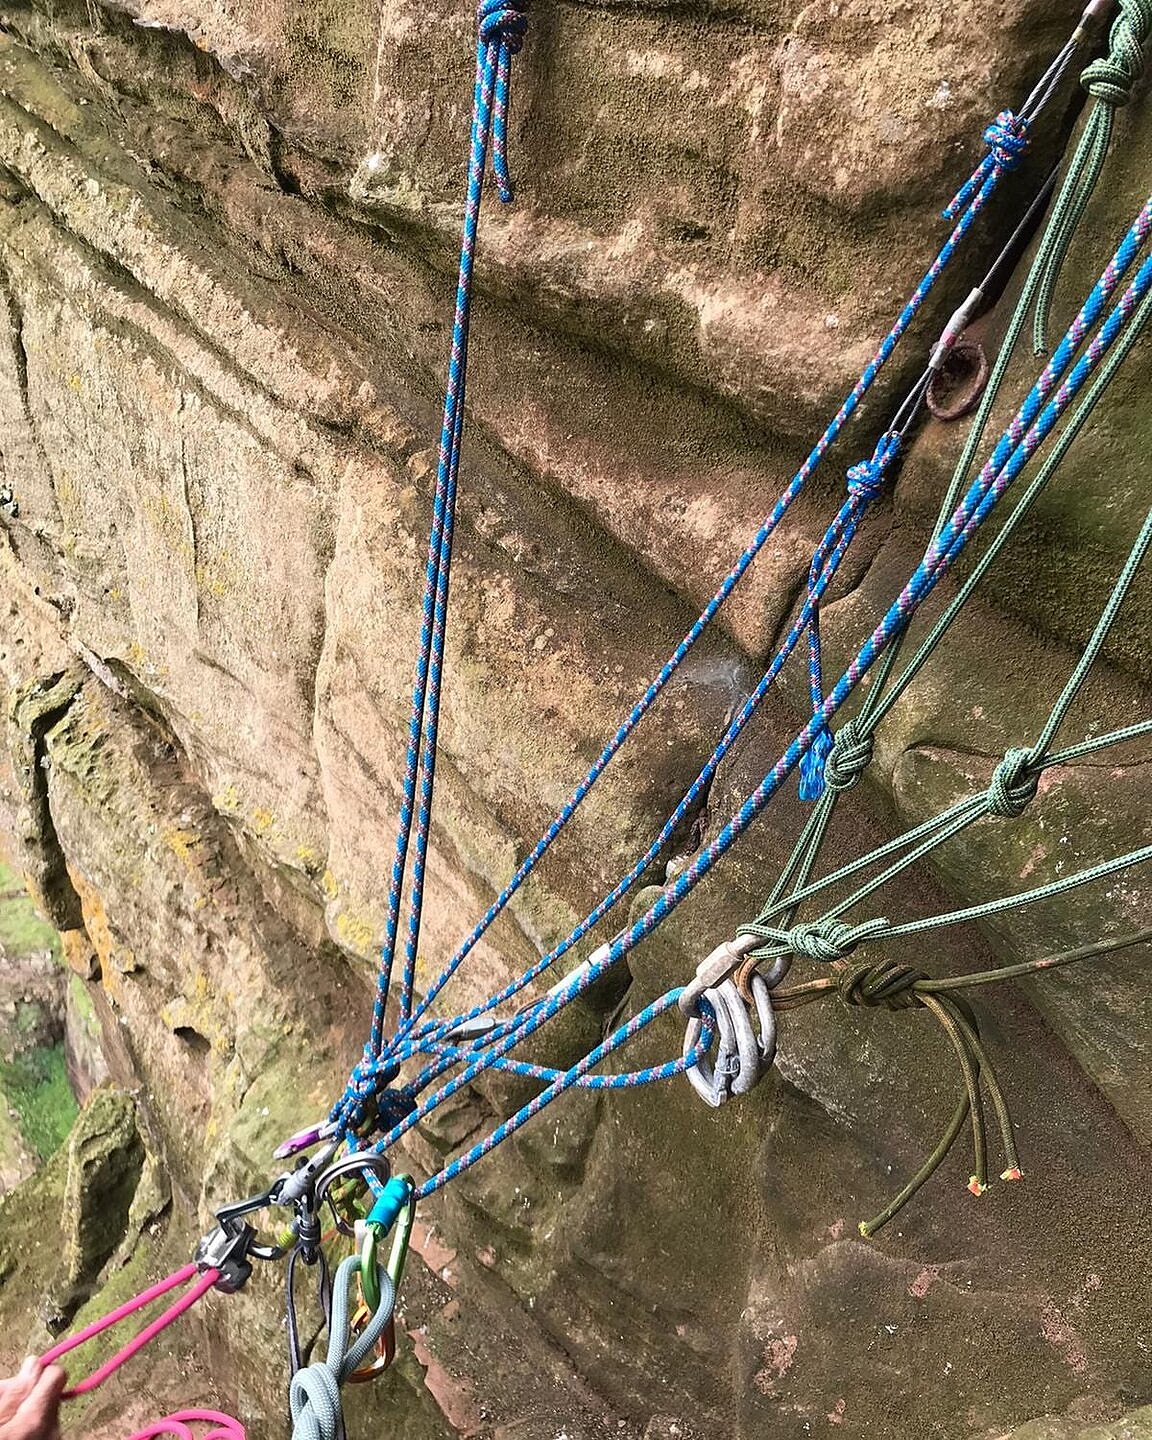 No need for unobtrusive belay/rap anchor when this is available.   © d8vehinton